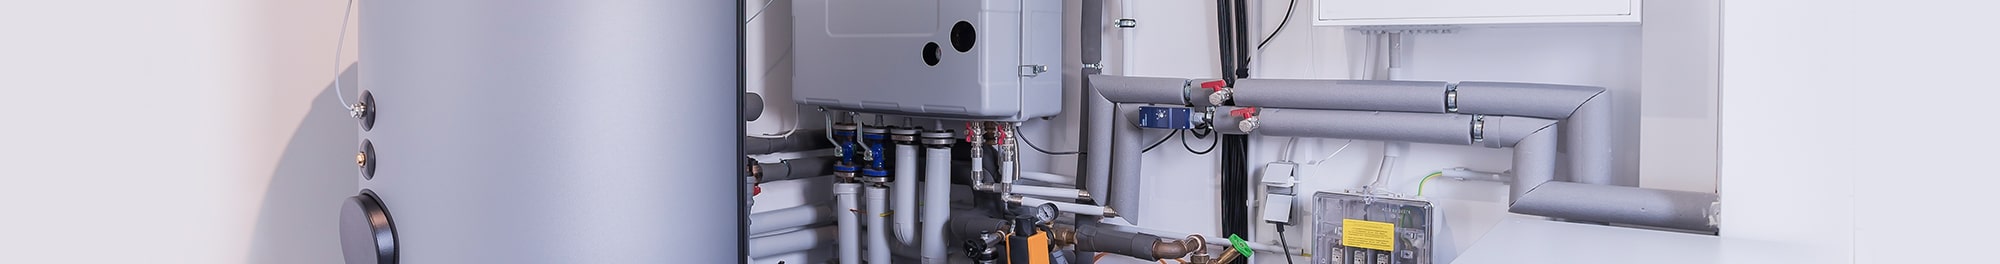 HVAC boiler repair, replacement, installation in Southeast Wisconsin